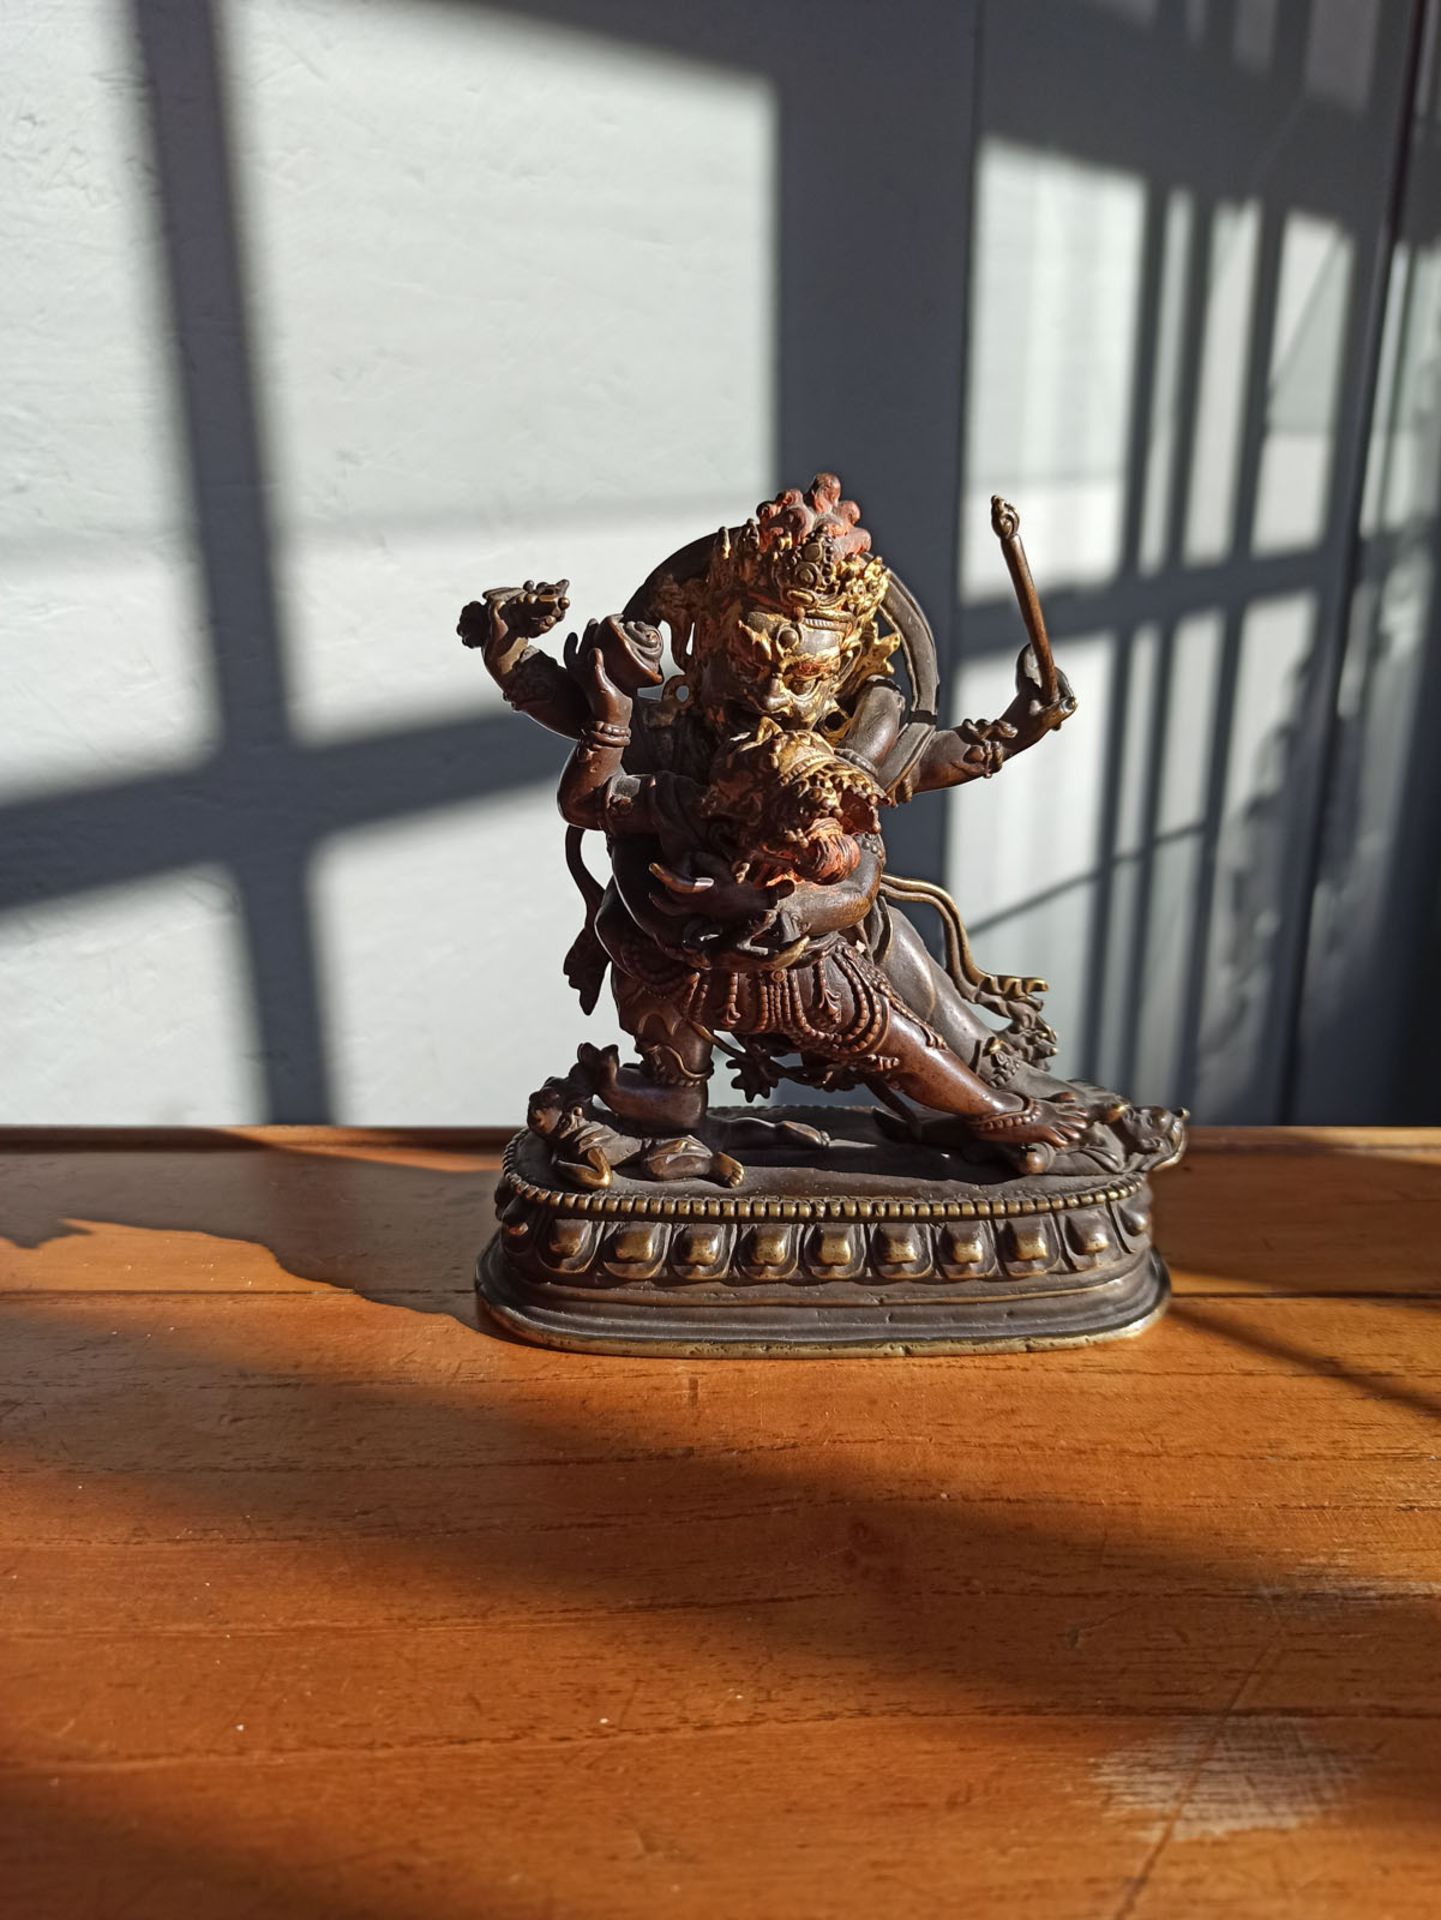 A RARE BRONZE EMANATION OF VAJRAPANI ON A LOTUS - Image 6 of 10